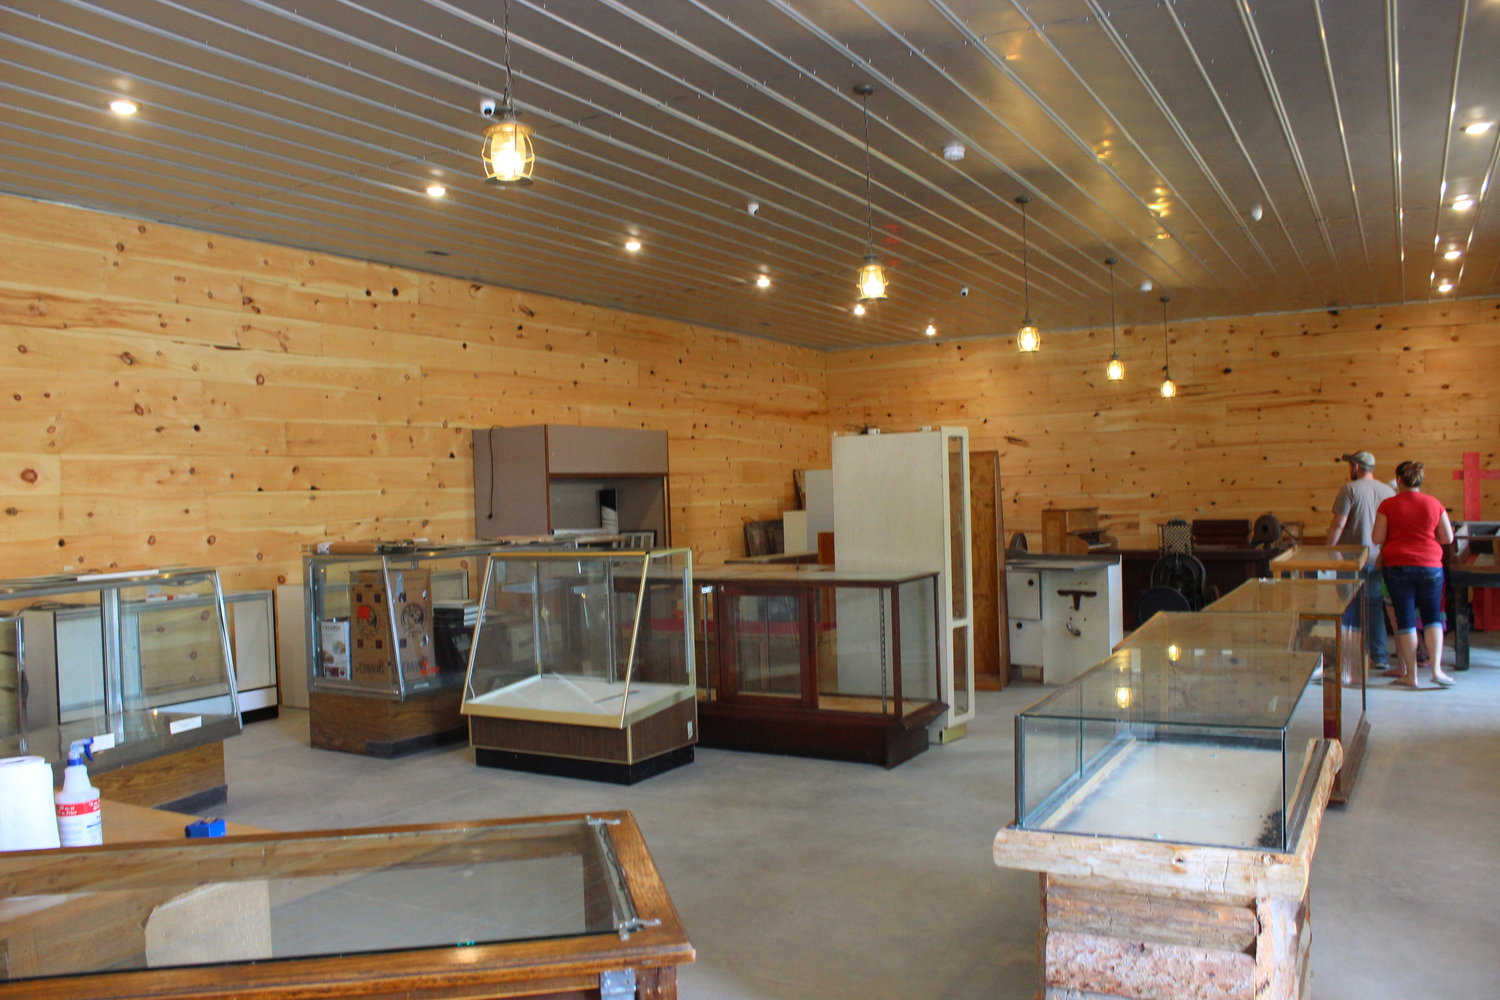 Display cases are ready to be filled inside the Mansfield Train Depot.